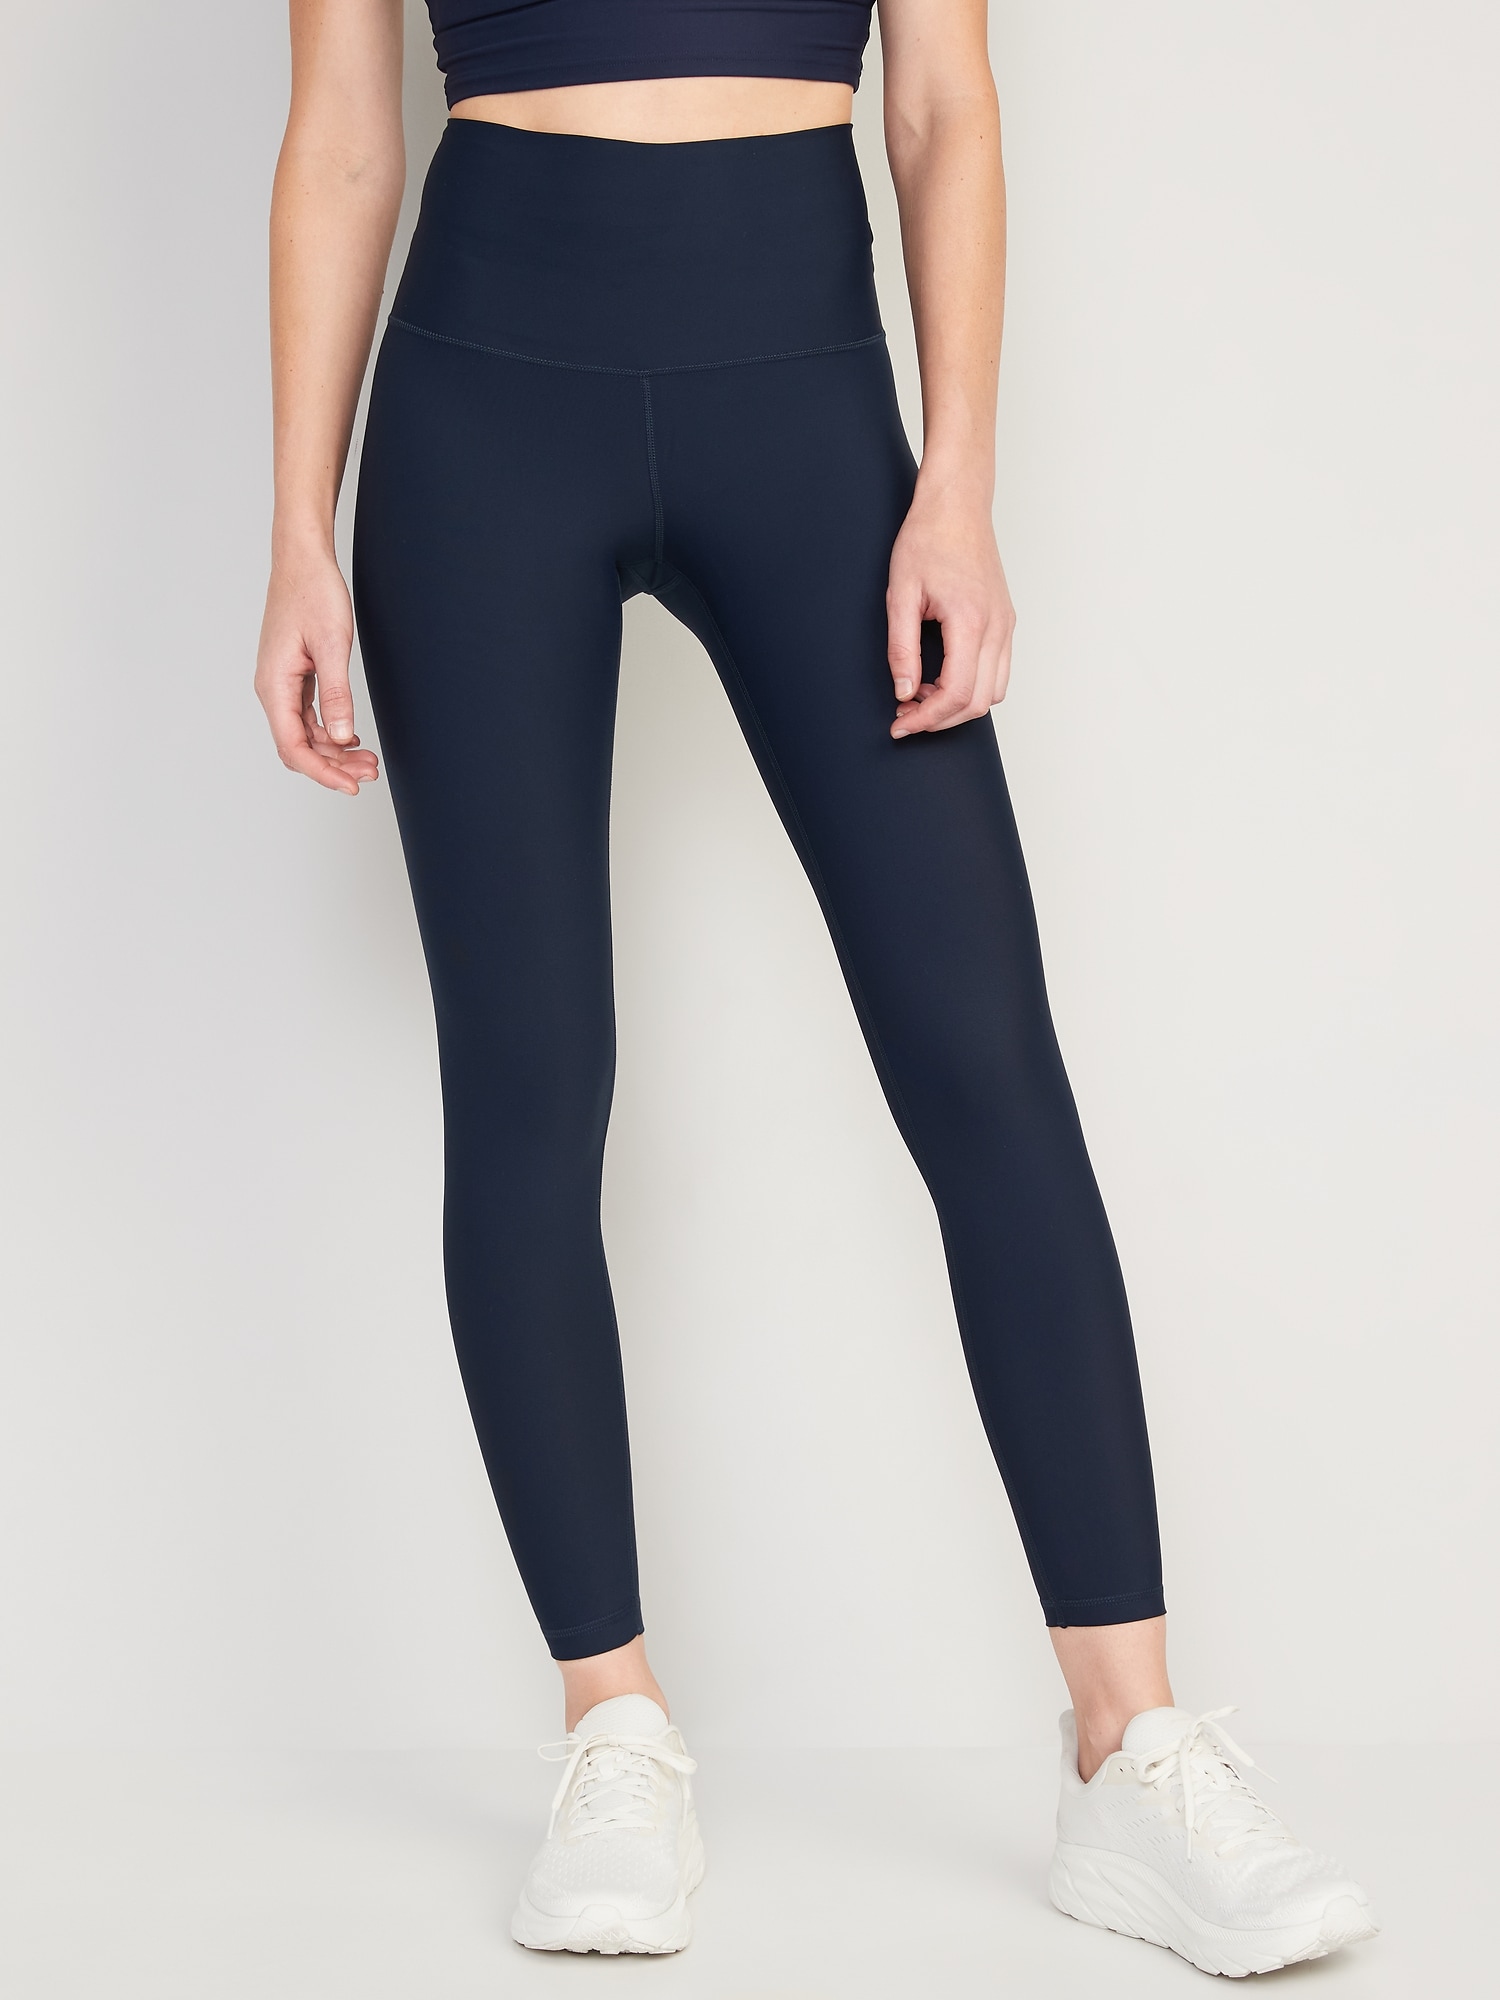 Ypser High Waisted Workout Mesh Cutout Leggings with Pockets